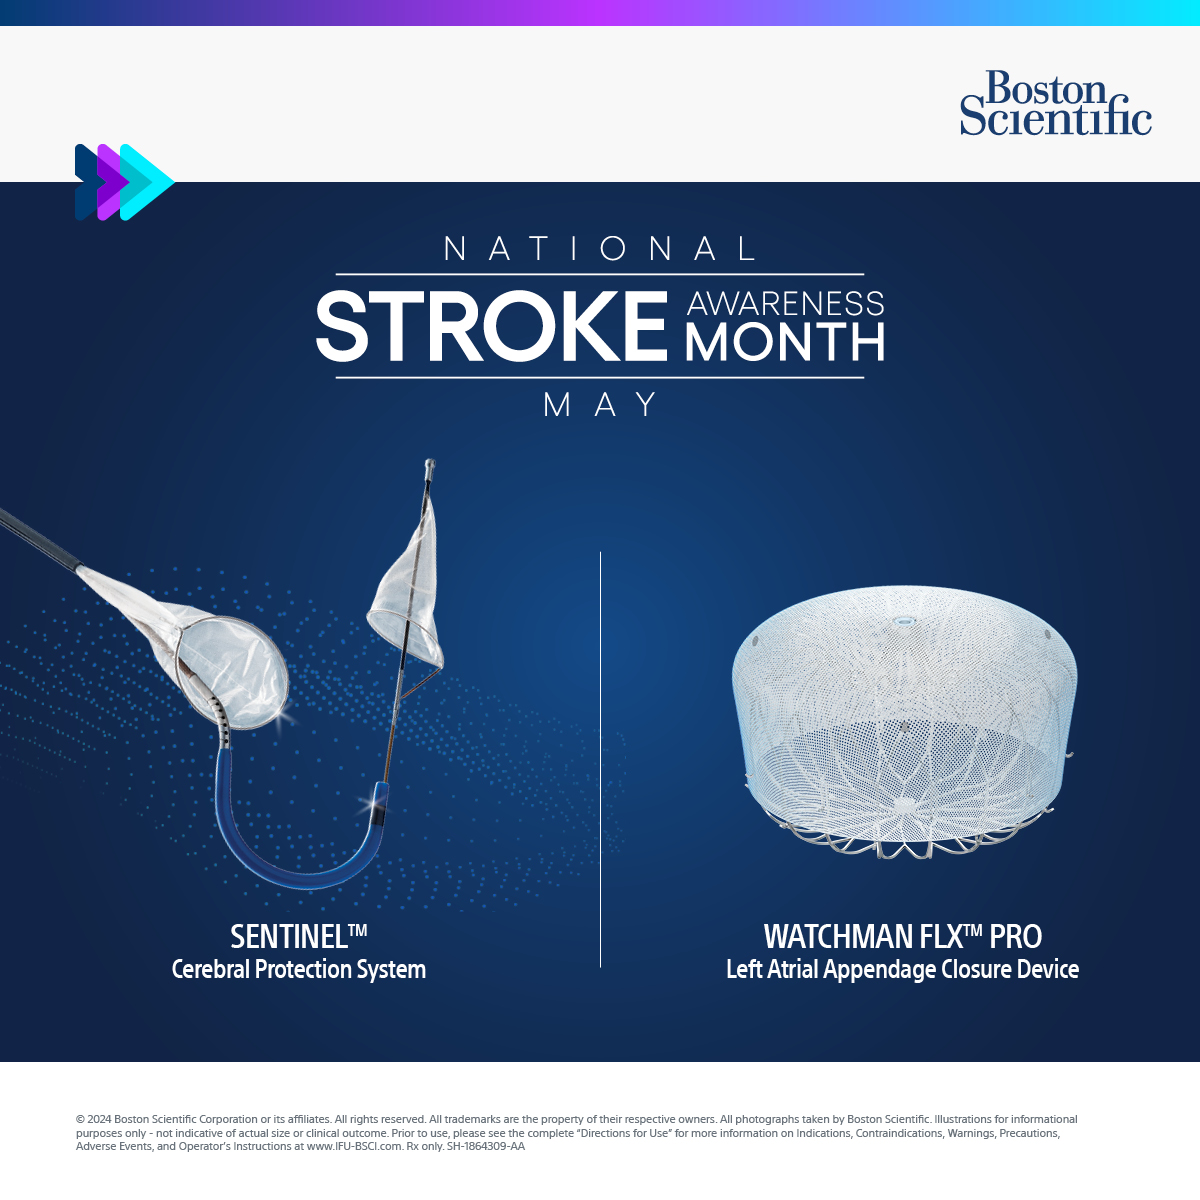 May is #StrokeAwarenessMonth. Did you know around 17 million people globally suffer a #stroke every year? We want to thank the healthcare professionals for their commitment to reducing the risk of stroke in both #TAVR and #LAAC patients diagnosed with aortic stenosis and #Afib.